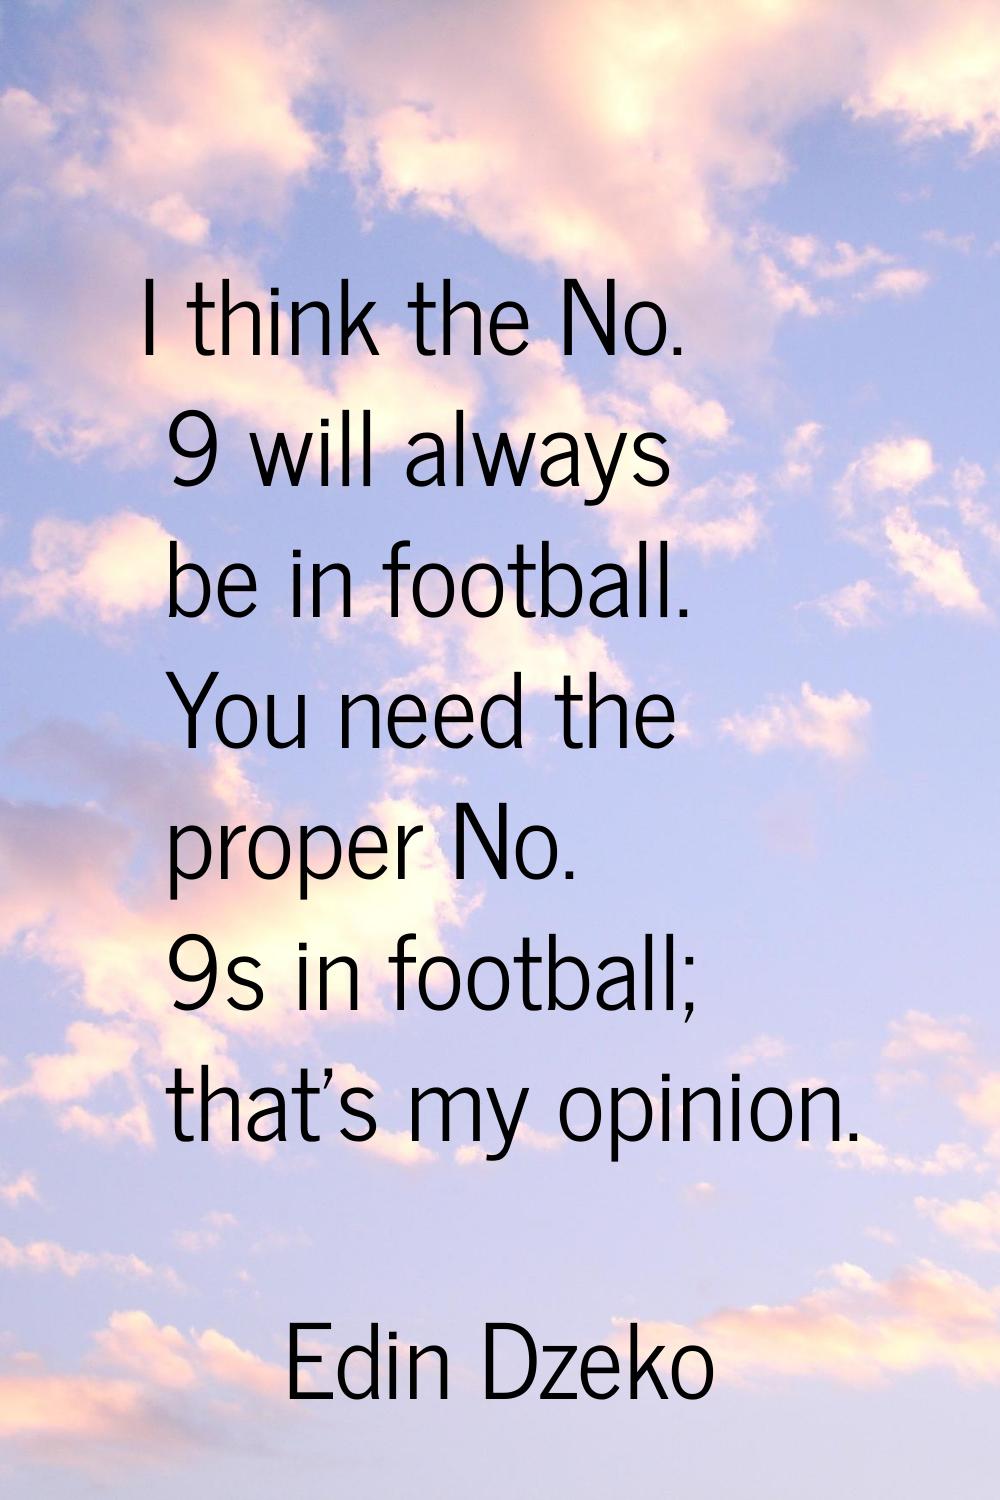 I think the No. 9 will always be in football. You need the proper No. 9s in football; that's my opi